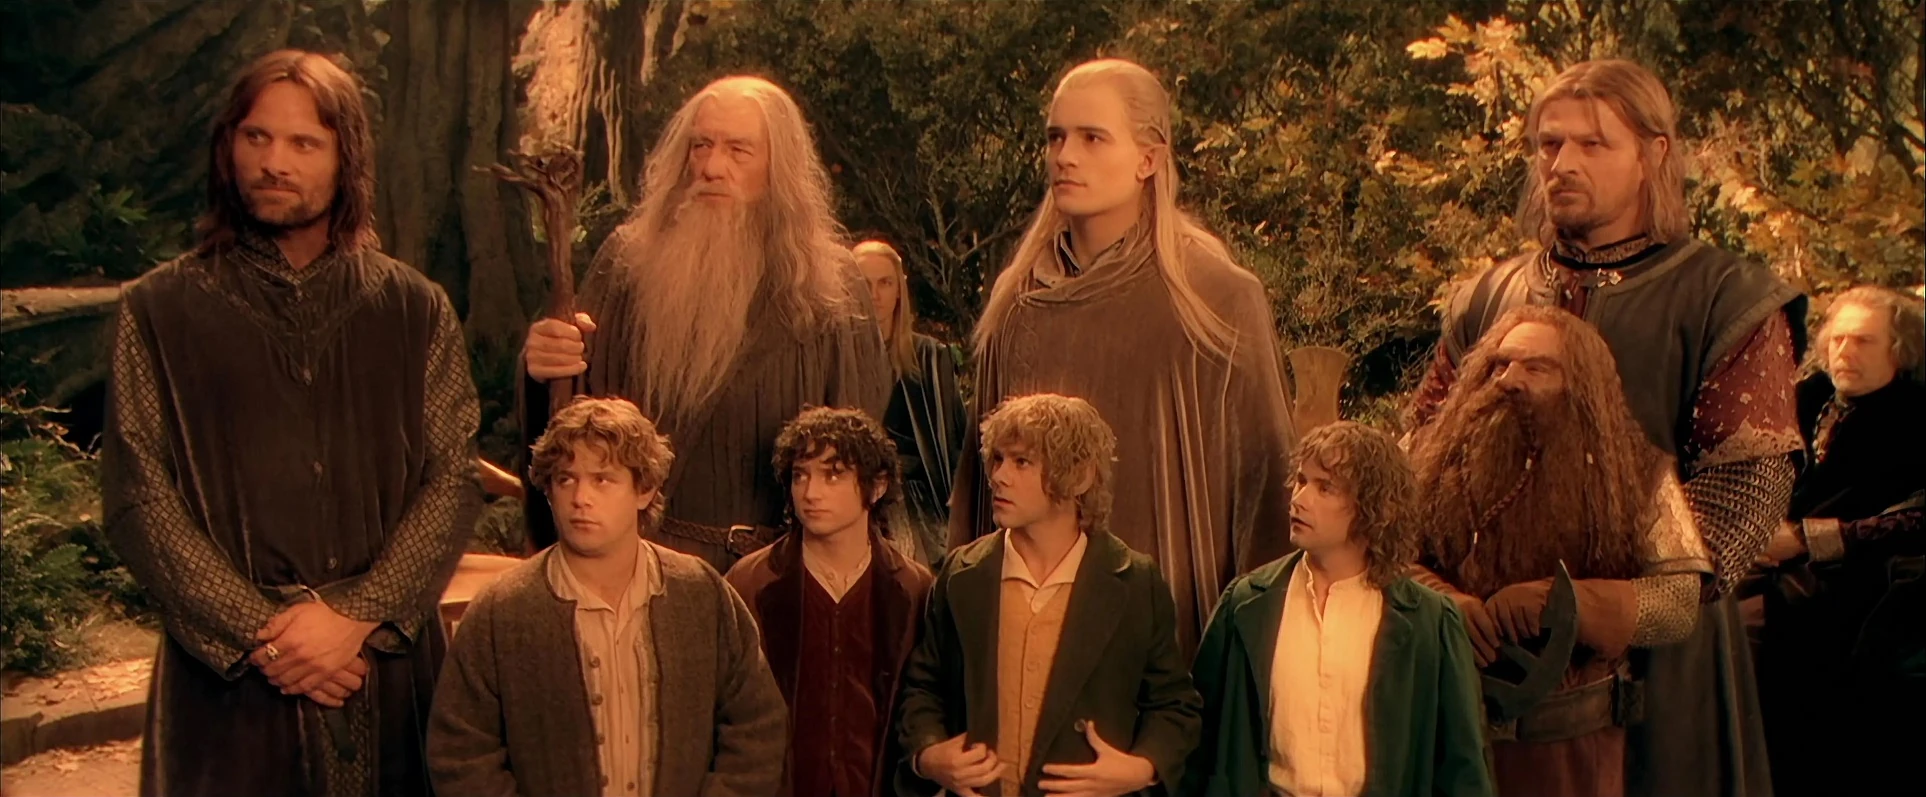 TOTLB 440 Fellowship of the Ring